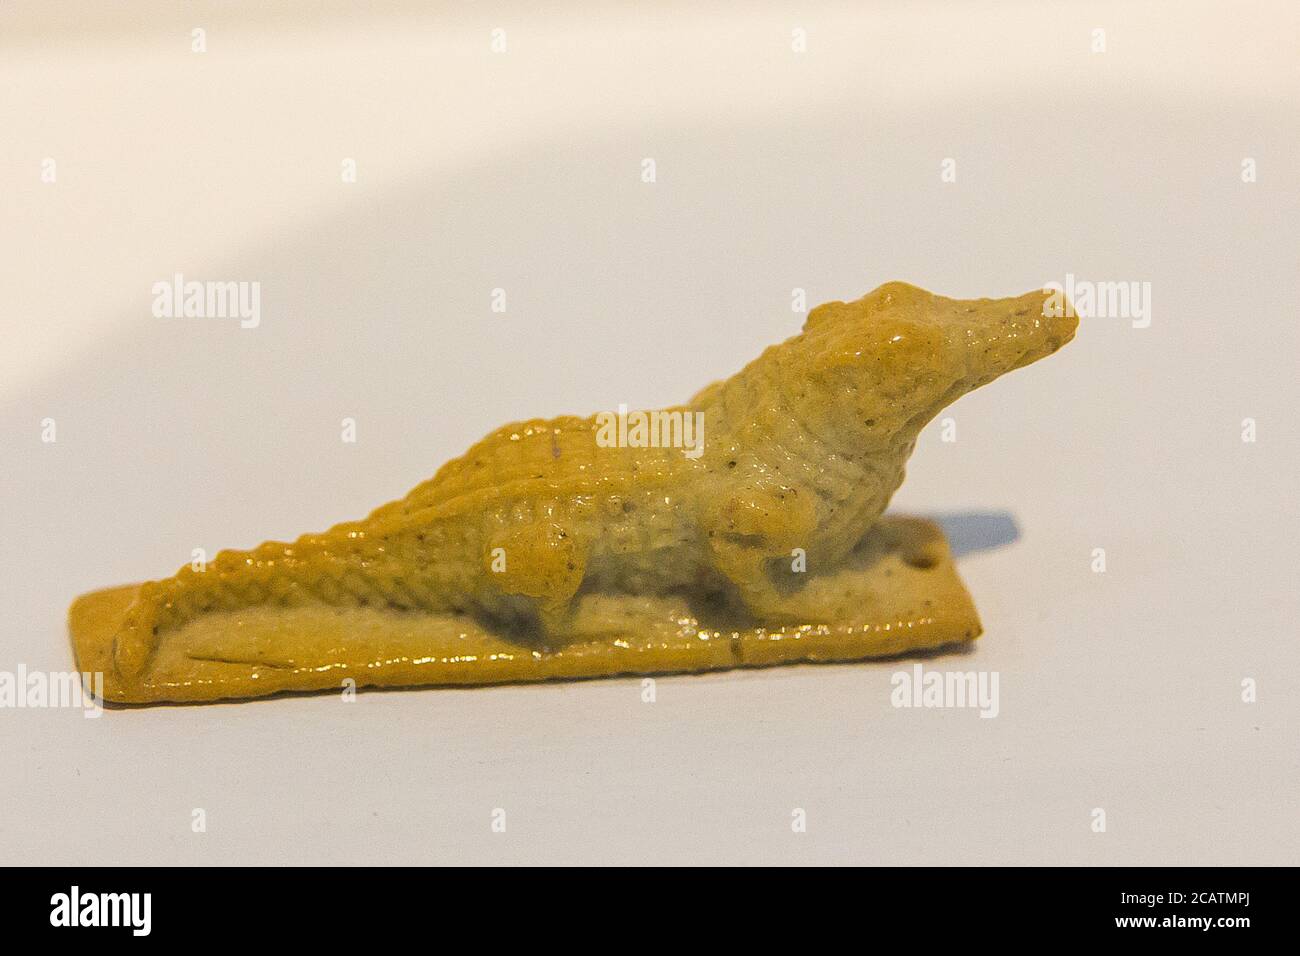 Exhibition 'The animal kingdom in Ancient Egypt', organized in 2015 by the Louvre Museum in Lens. Statuette of a crocodile, faience. Stock Photo